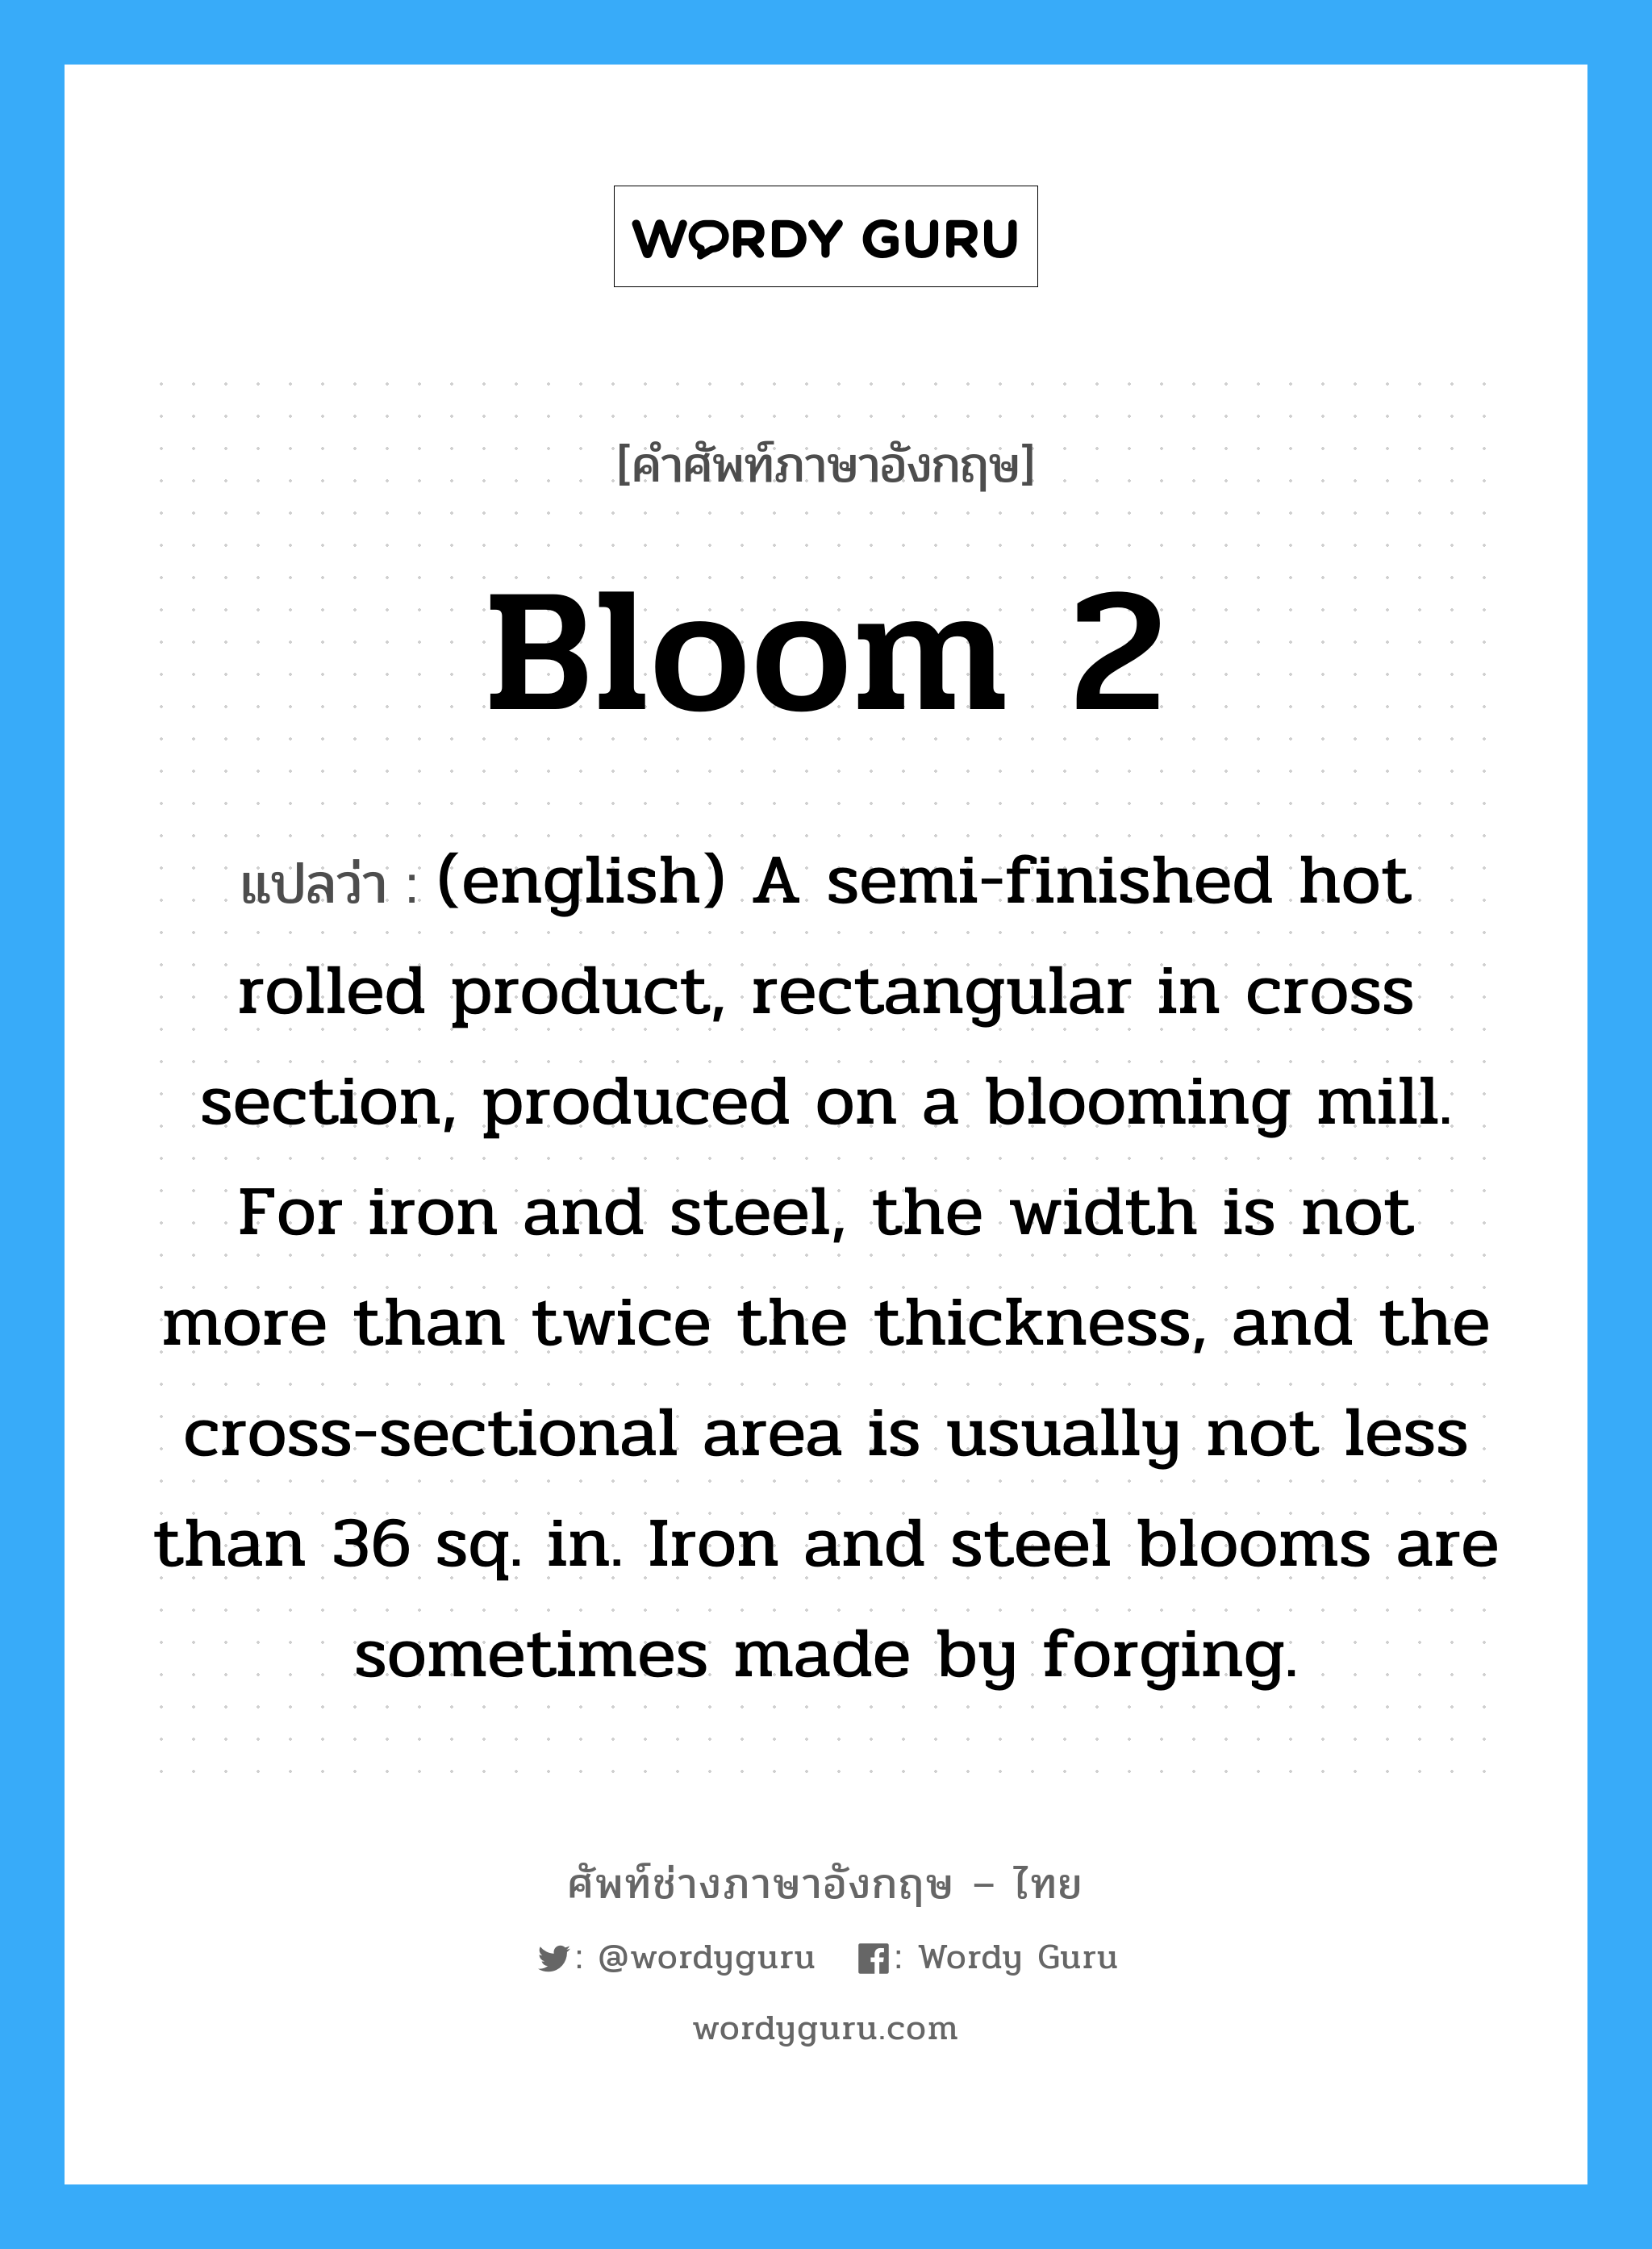 Bloom 2 แปลว่า?, คำศัพท์ช่างภาษาอังกฤษ - ไทย Bloom 2 คำศัพท์ภาษาอังกฤษ Bloom 2 แปลว่า (english) A semi-finished hot rolled product, rectangular in cross section, produced on a blooming mill. For iron and steel, the width is not more than twice the thickness, and the cross-sectional area is usually not less than 36 sq. in. Iron and steel blooms are sometimes made by forging.